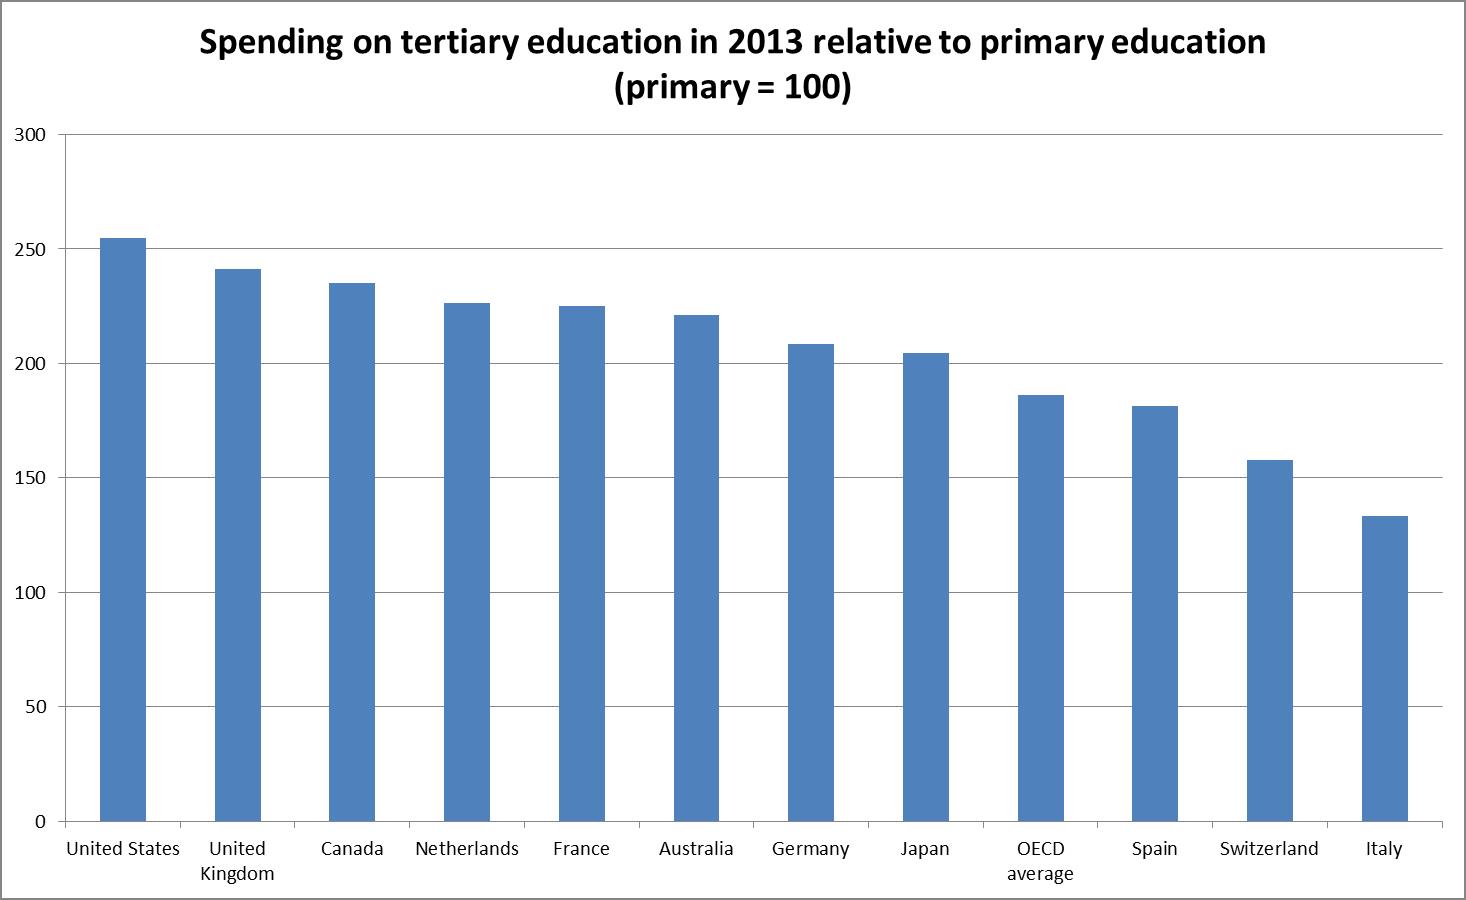 Tertiary education spending per student compared with primary education in selected countries in 2013